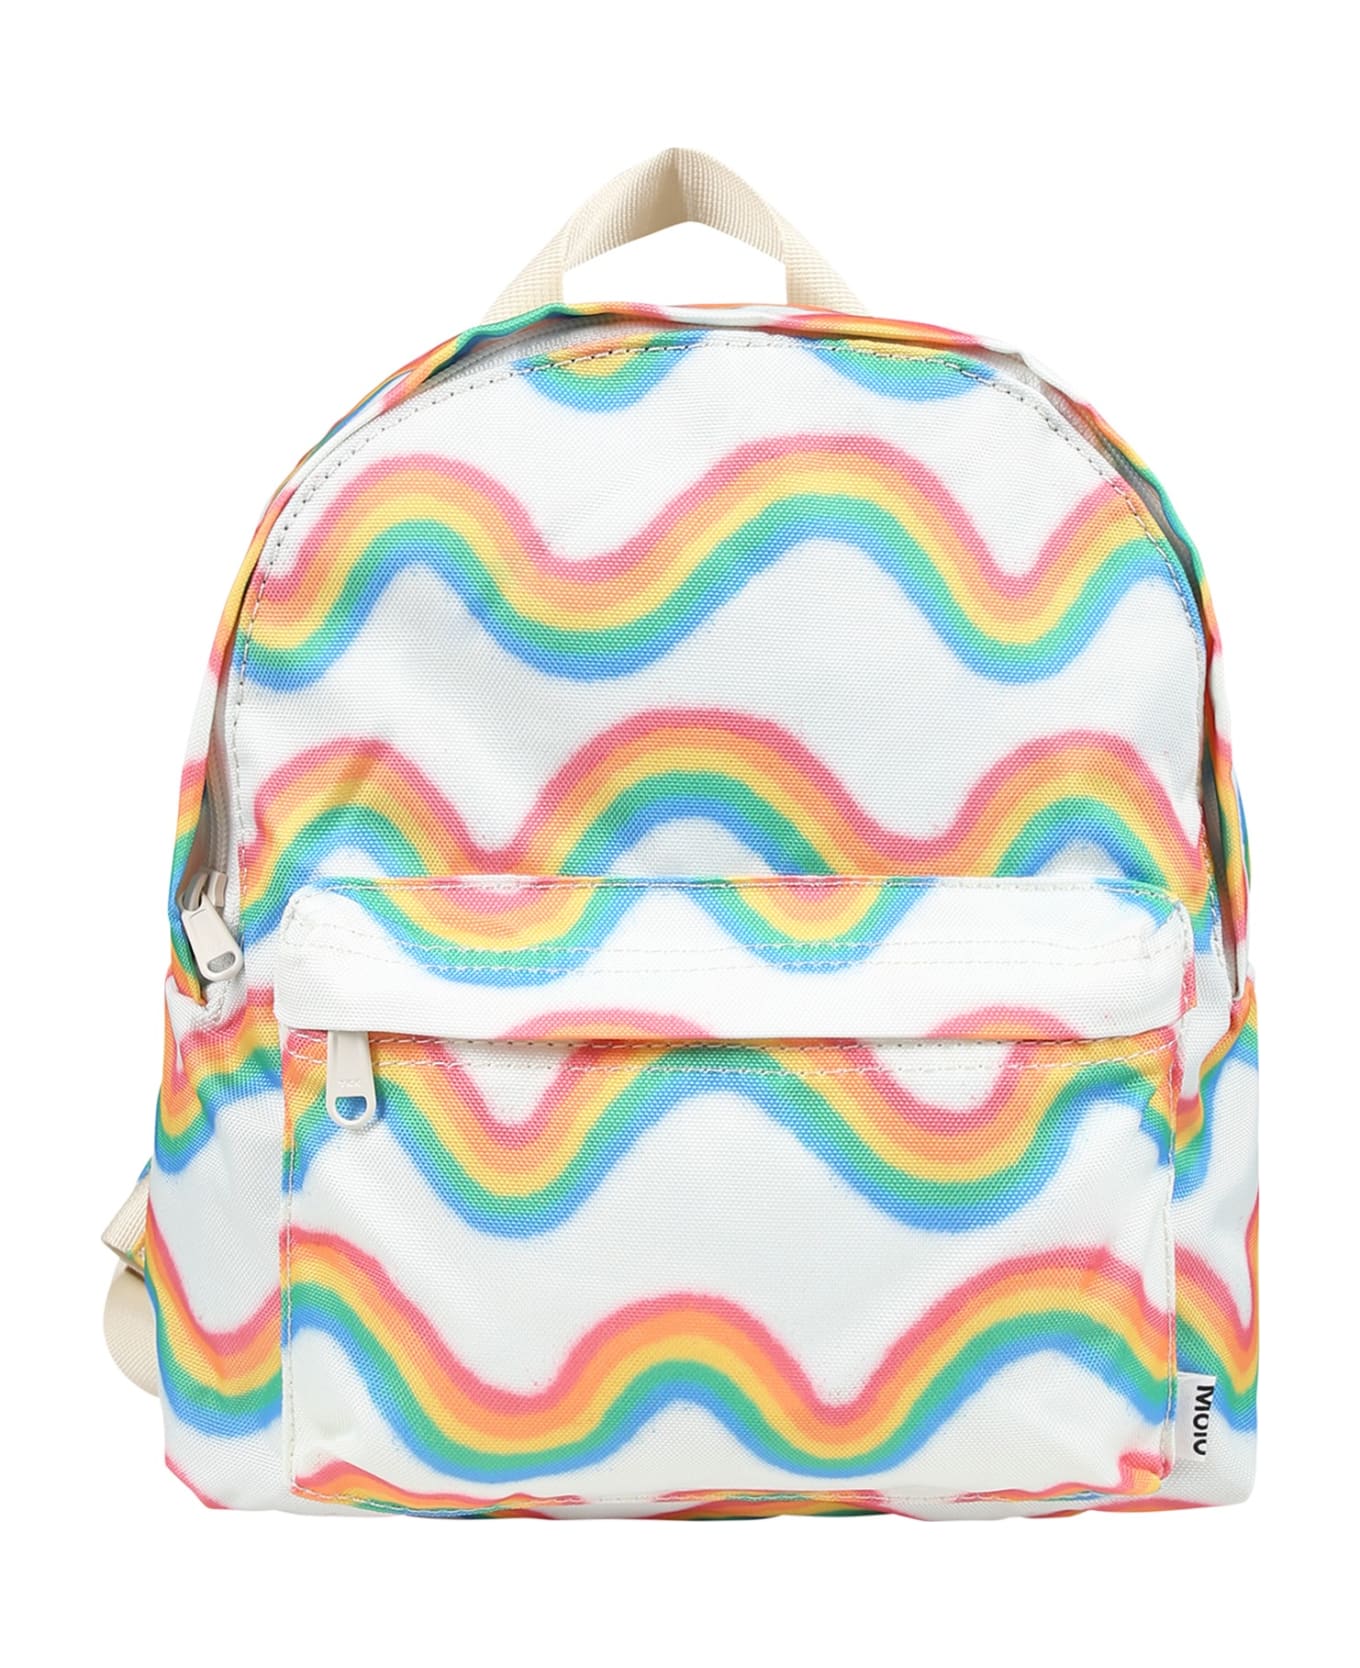 Molo White Backpack For Kids With Rainbow Print - Multicolor